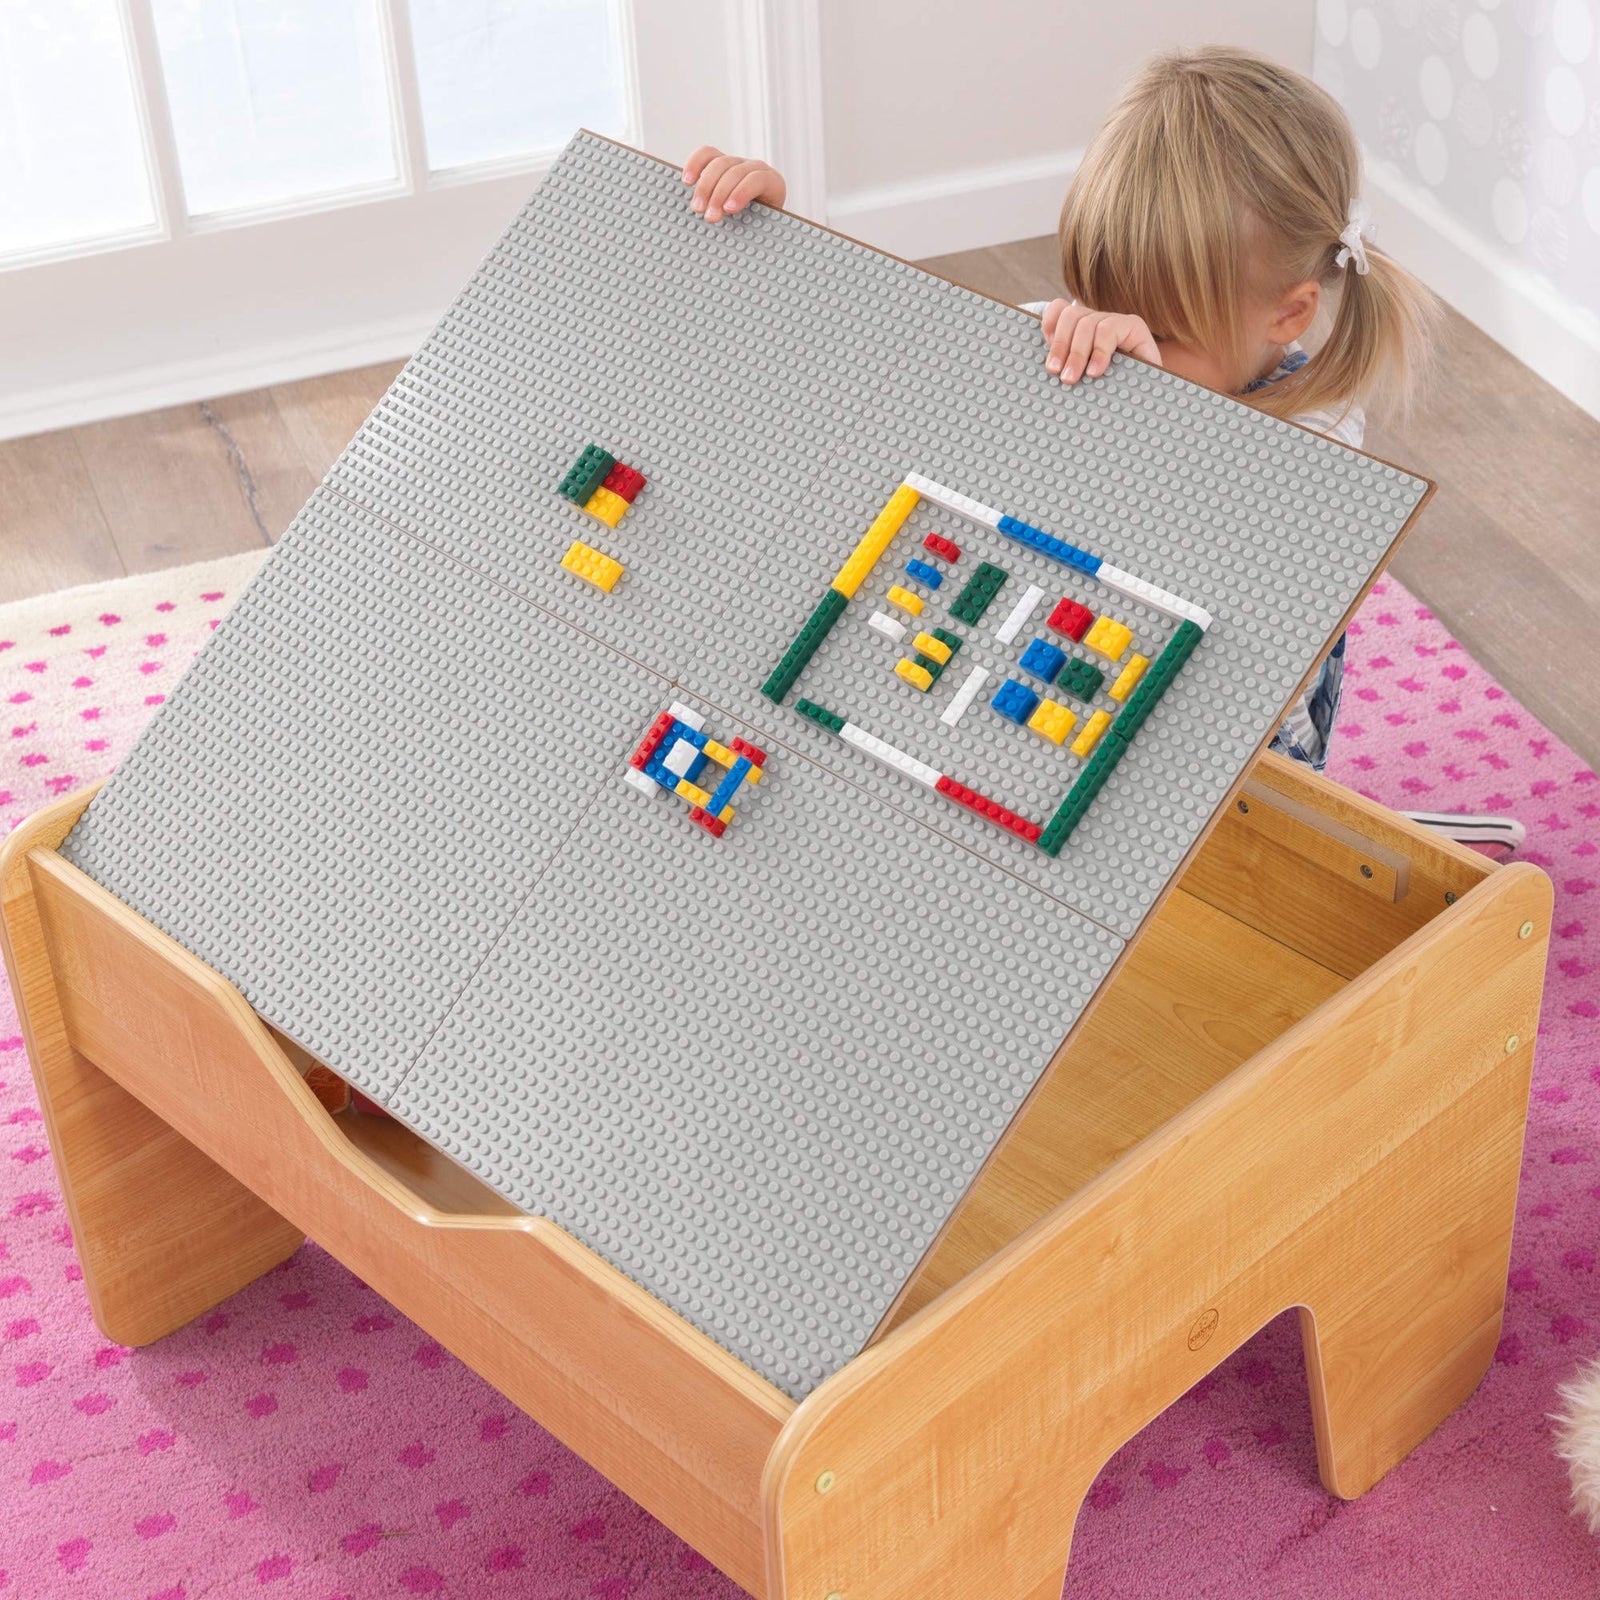 KidKraft Reversible Wooden Activity Table with Board with 195 Building Bricks – Gray & Natural, Gift for Ages 3+